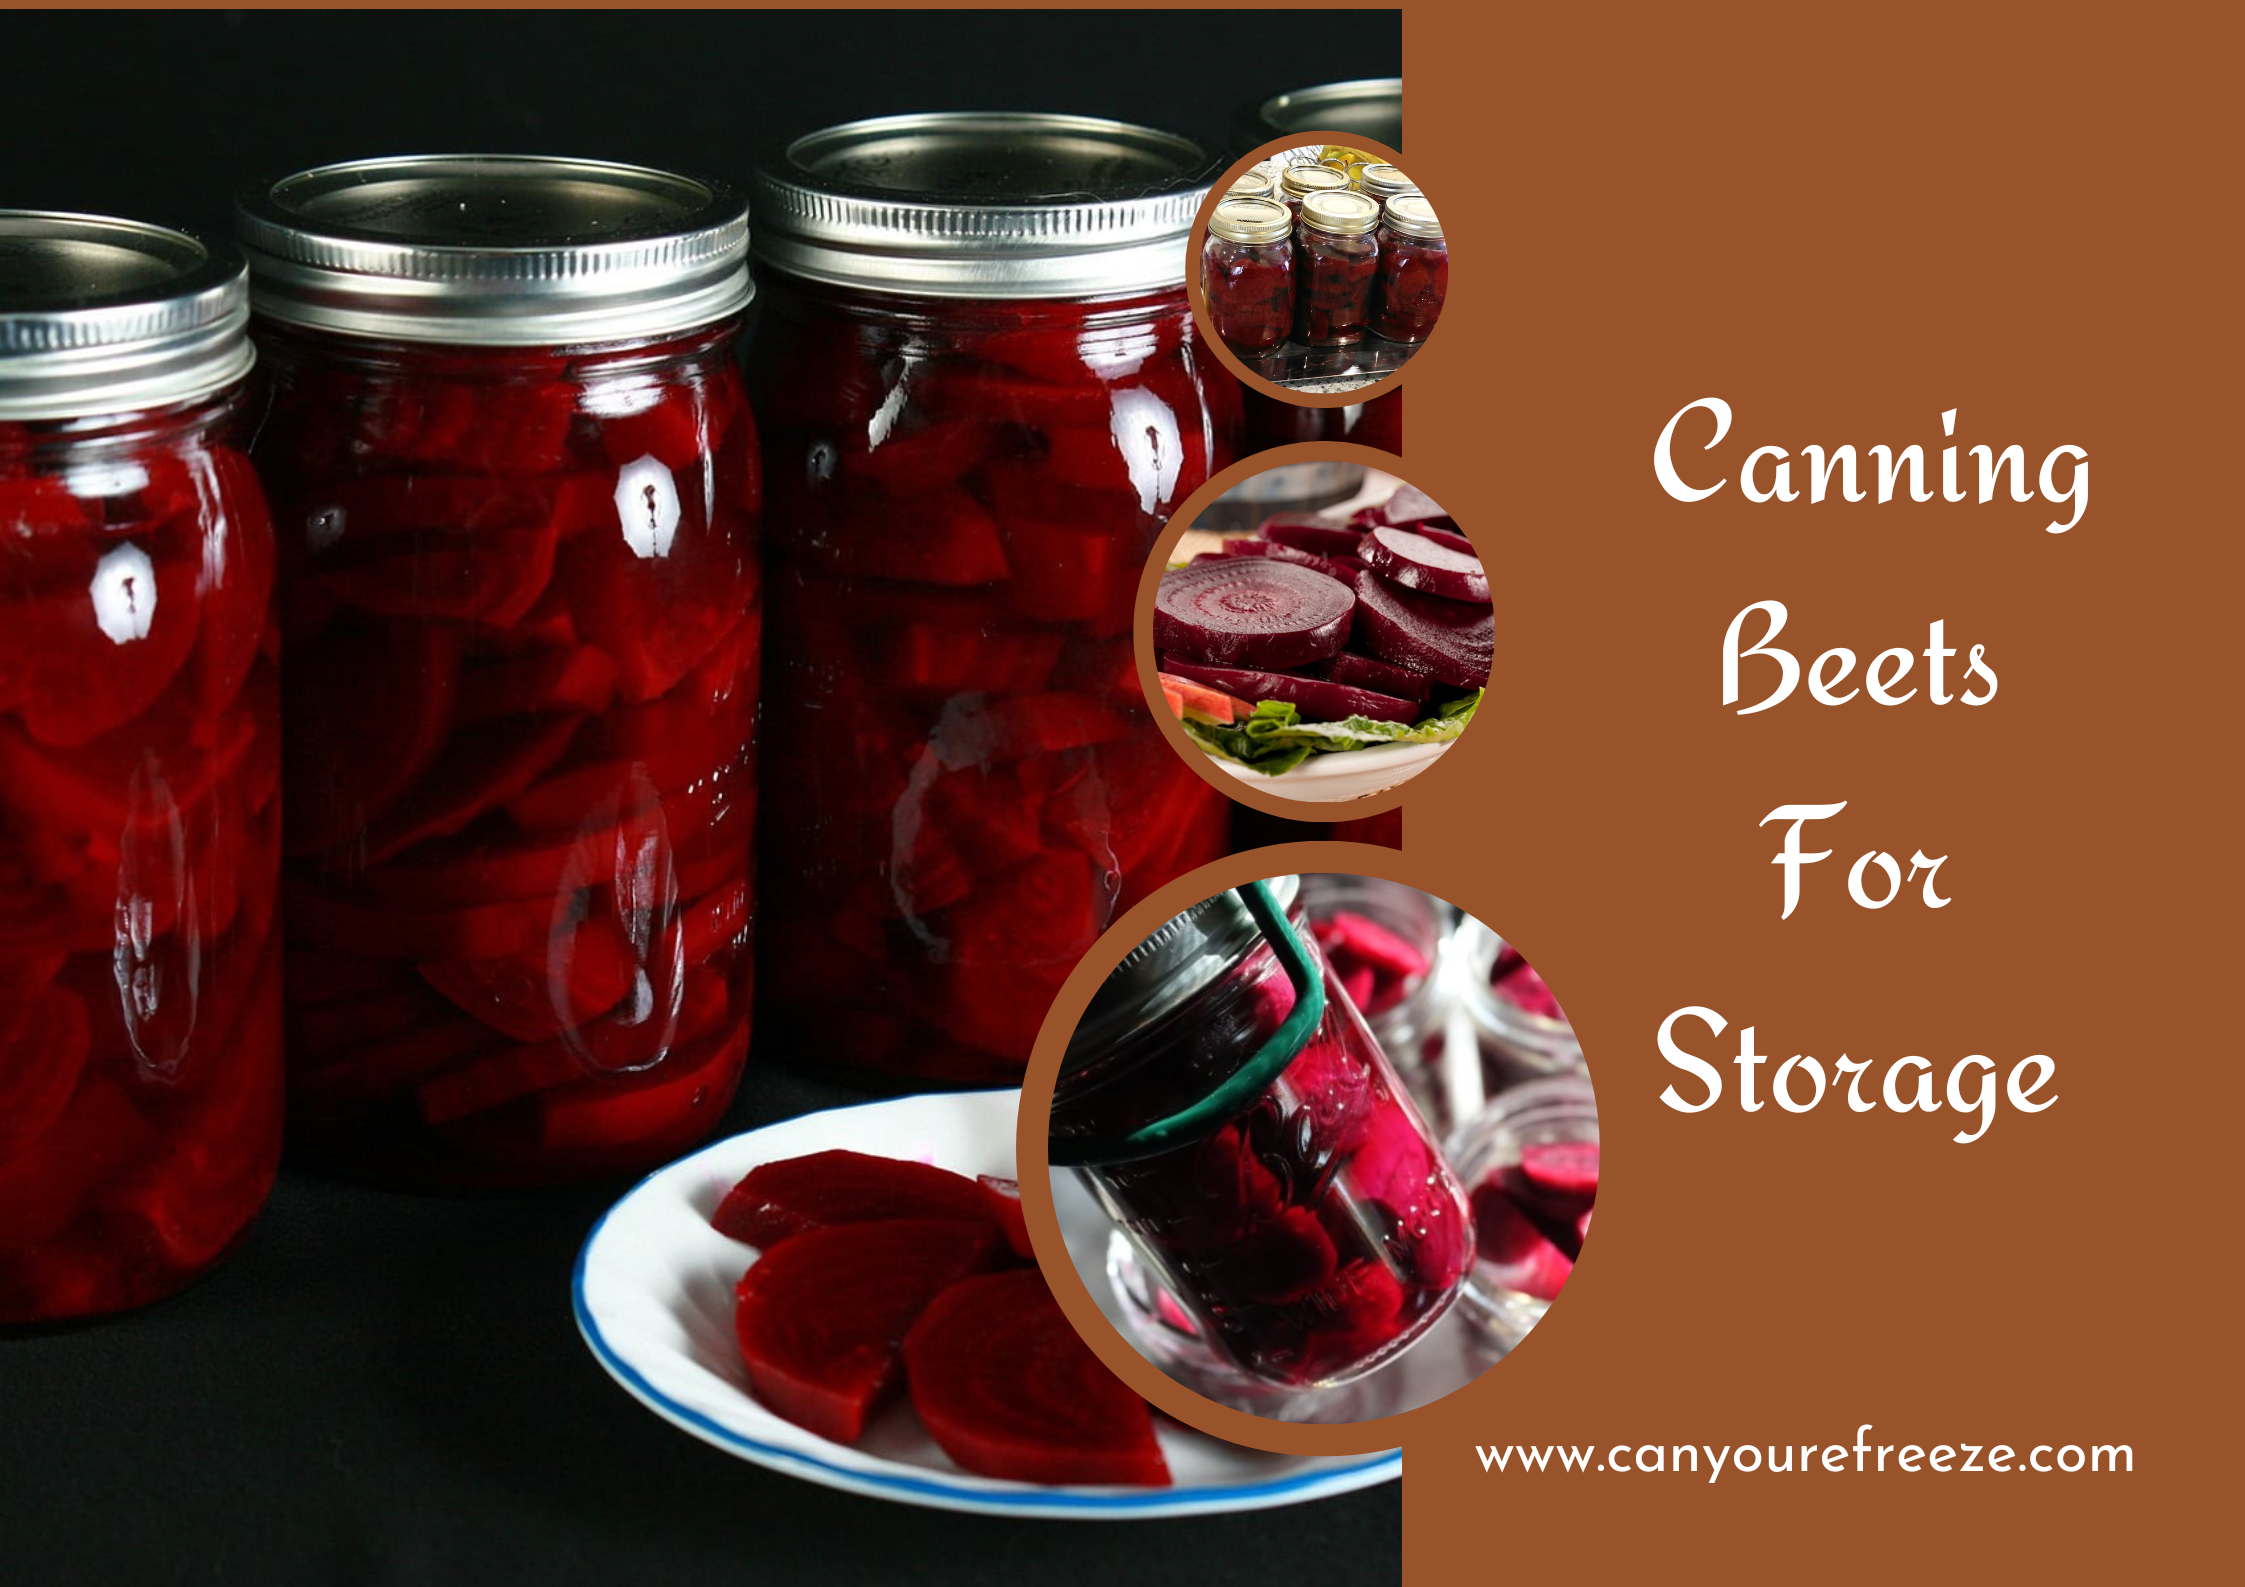 Canning Beets For Storage